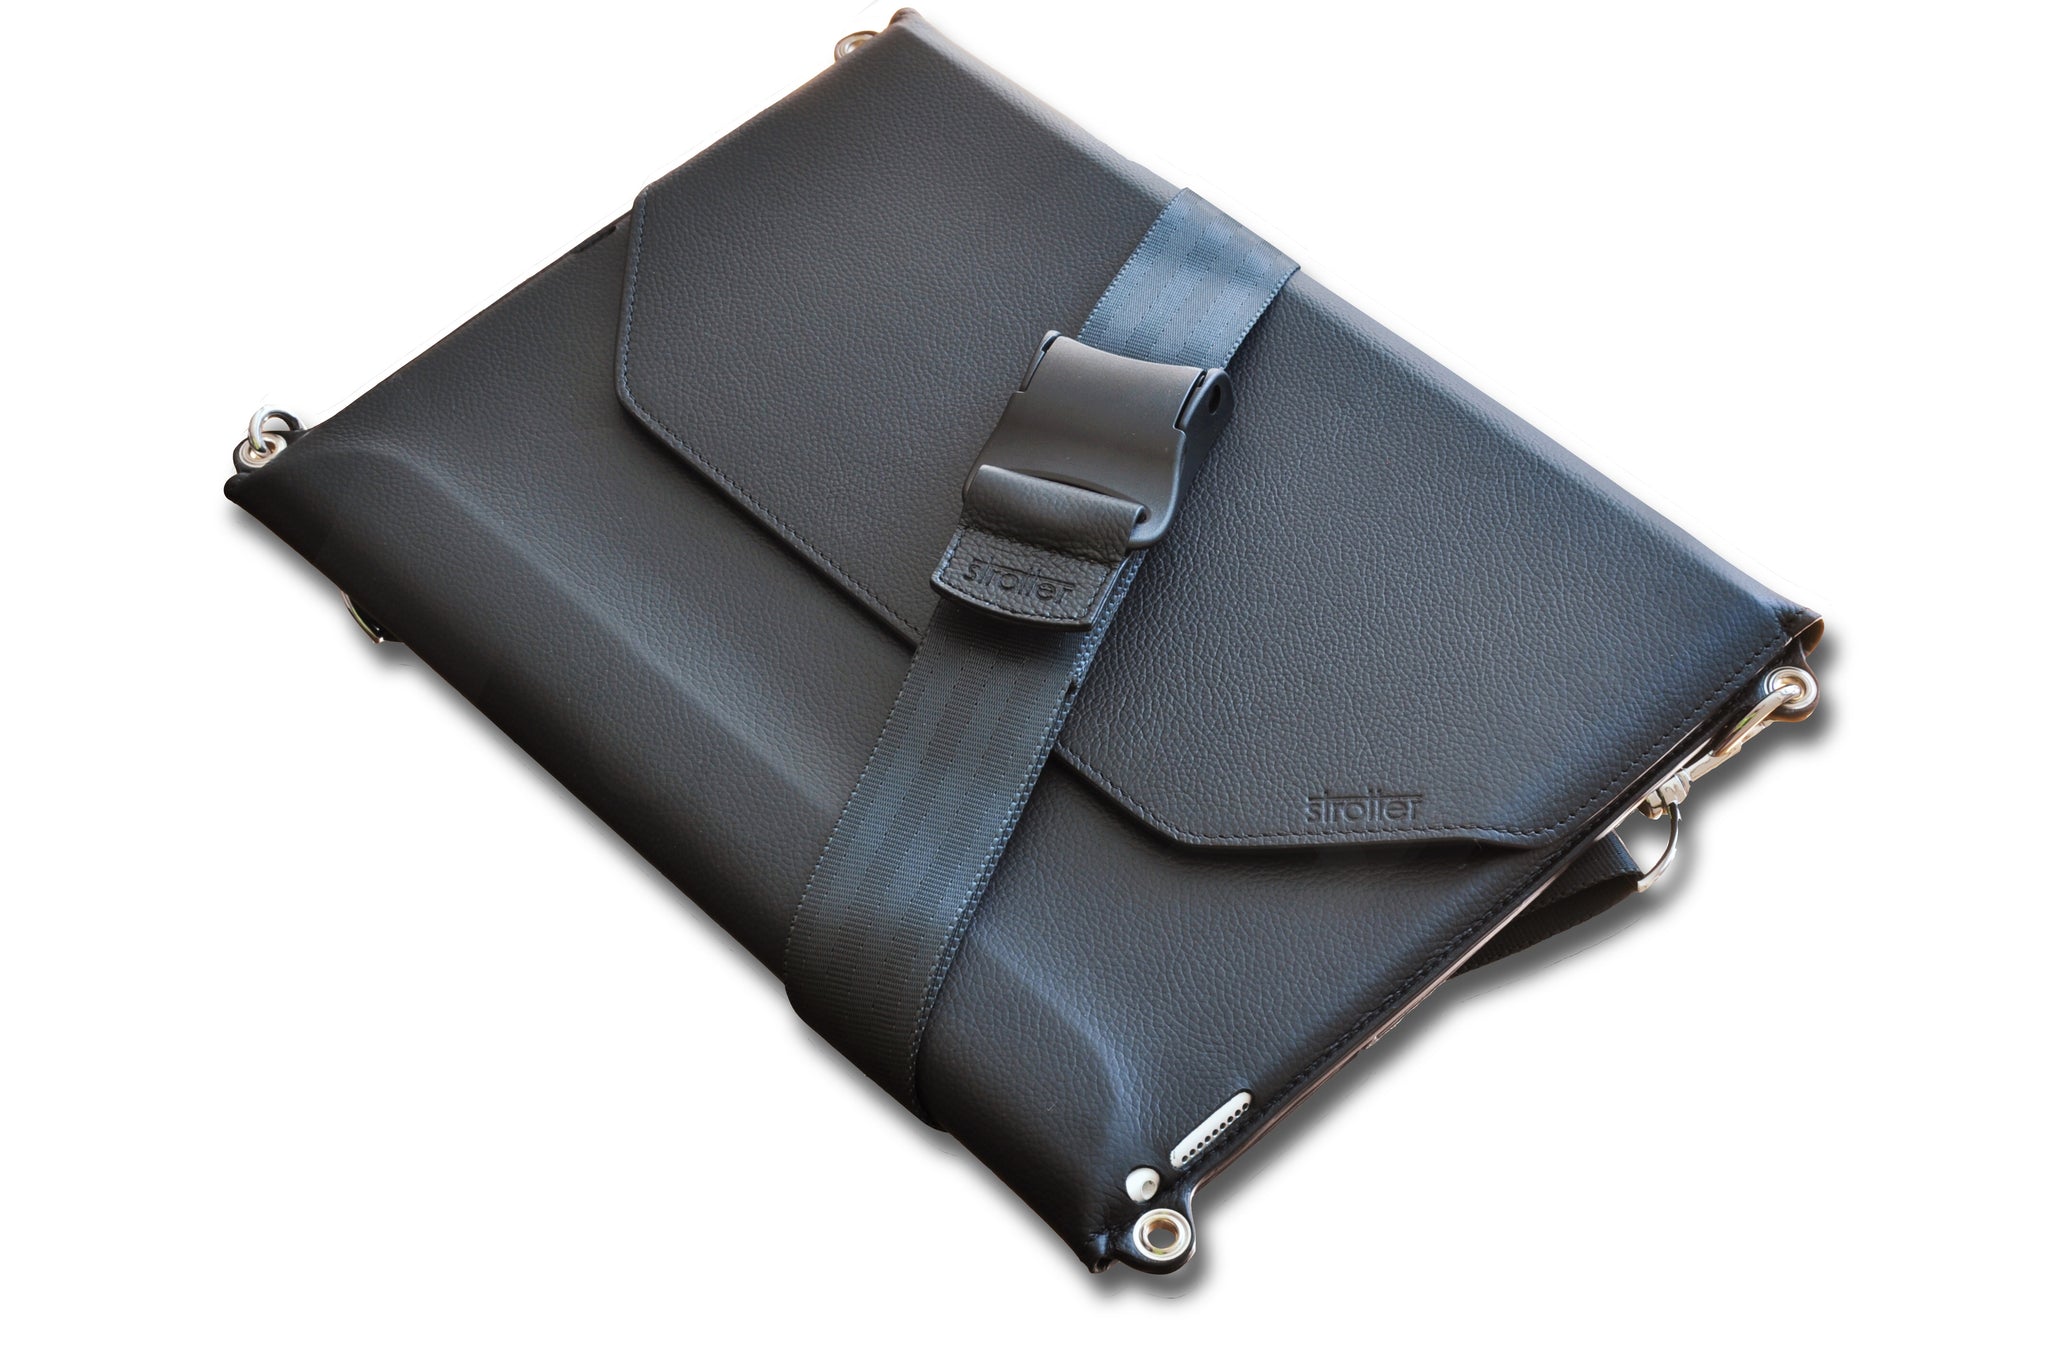 Black leather case with shoulder strap for iPad Pro 12.9